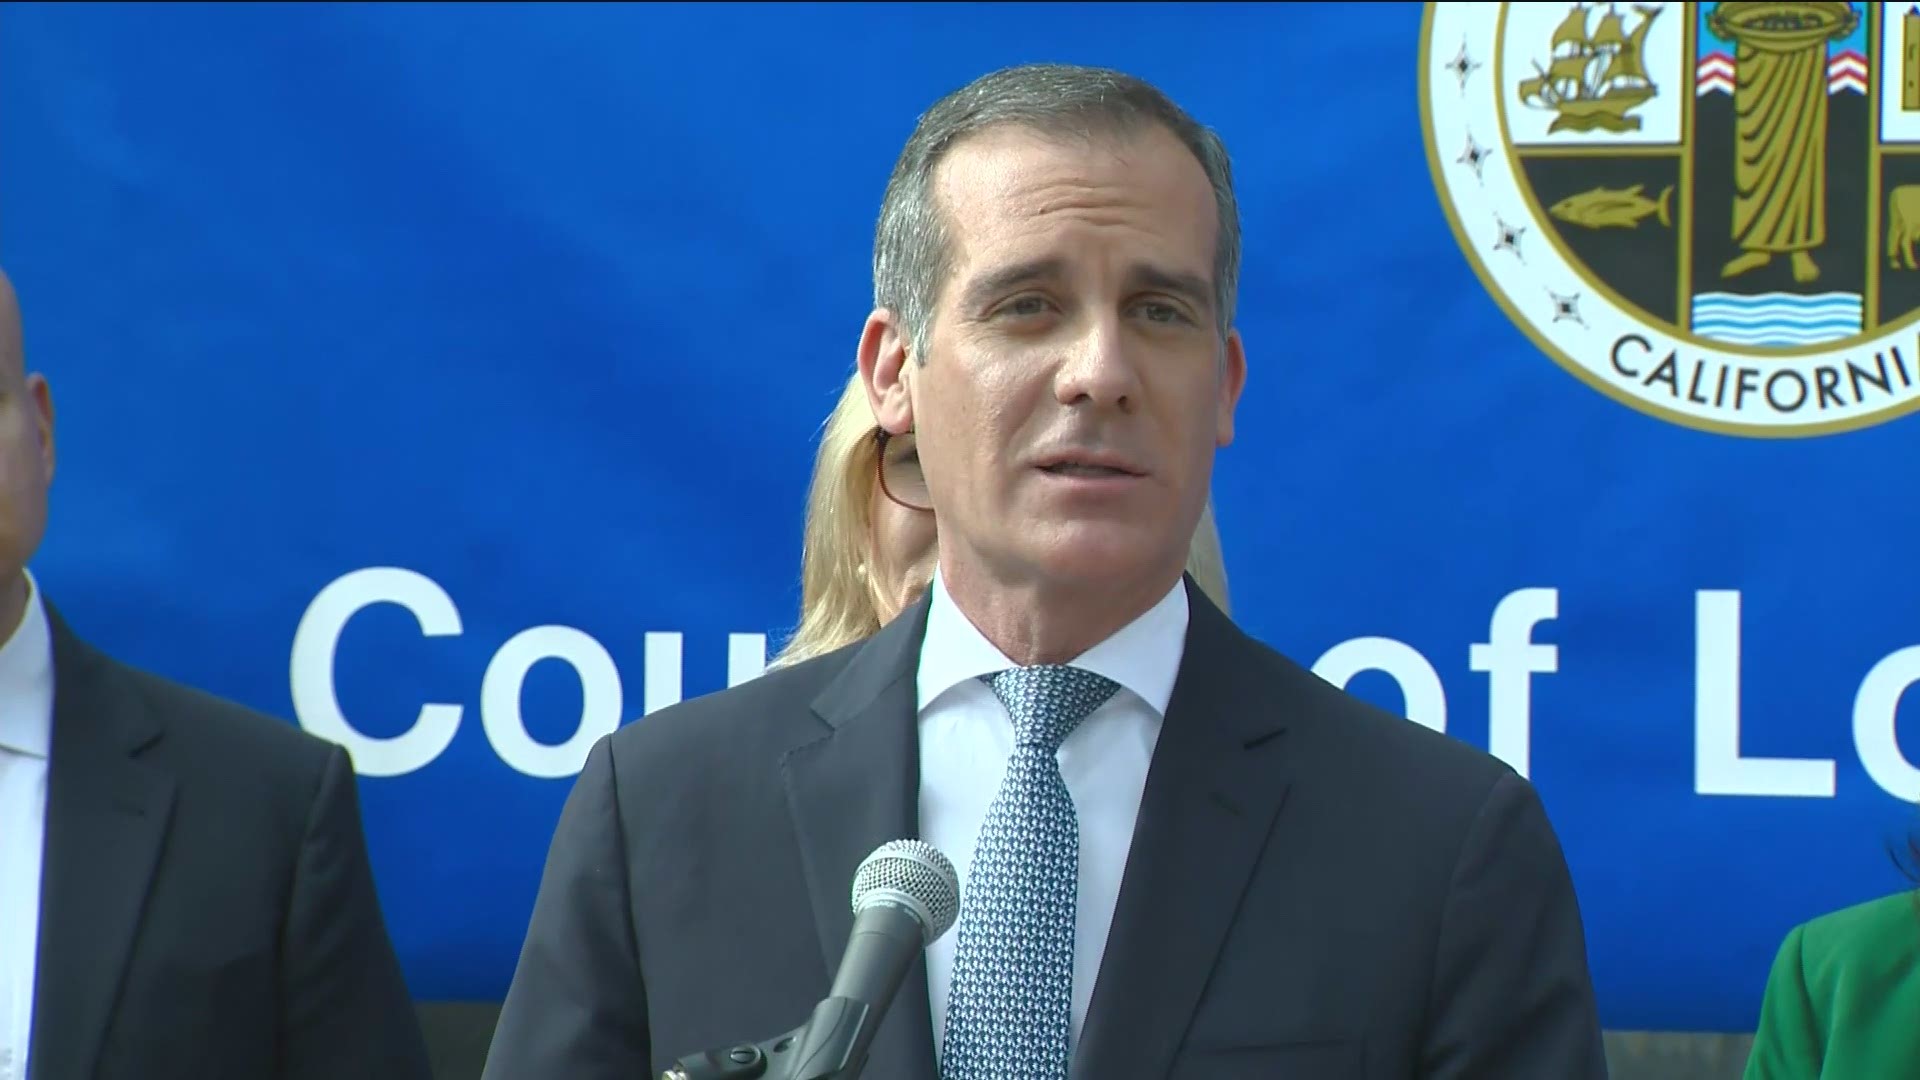 In a news conference Wednesday, the L.A. County Department of Public Health announced that it was declaring a local health emergency.